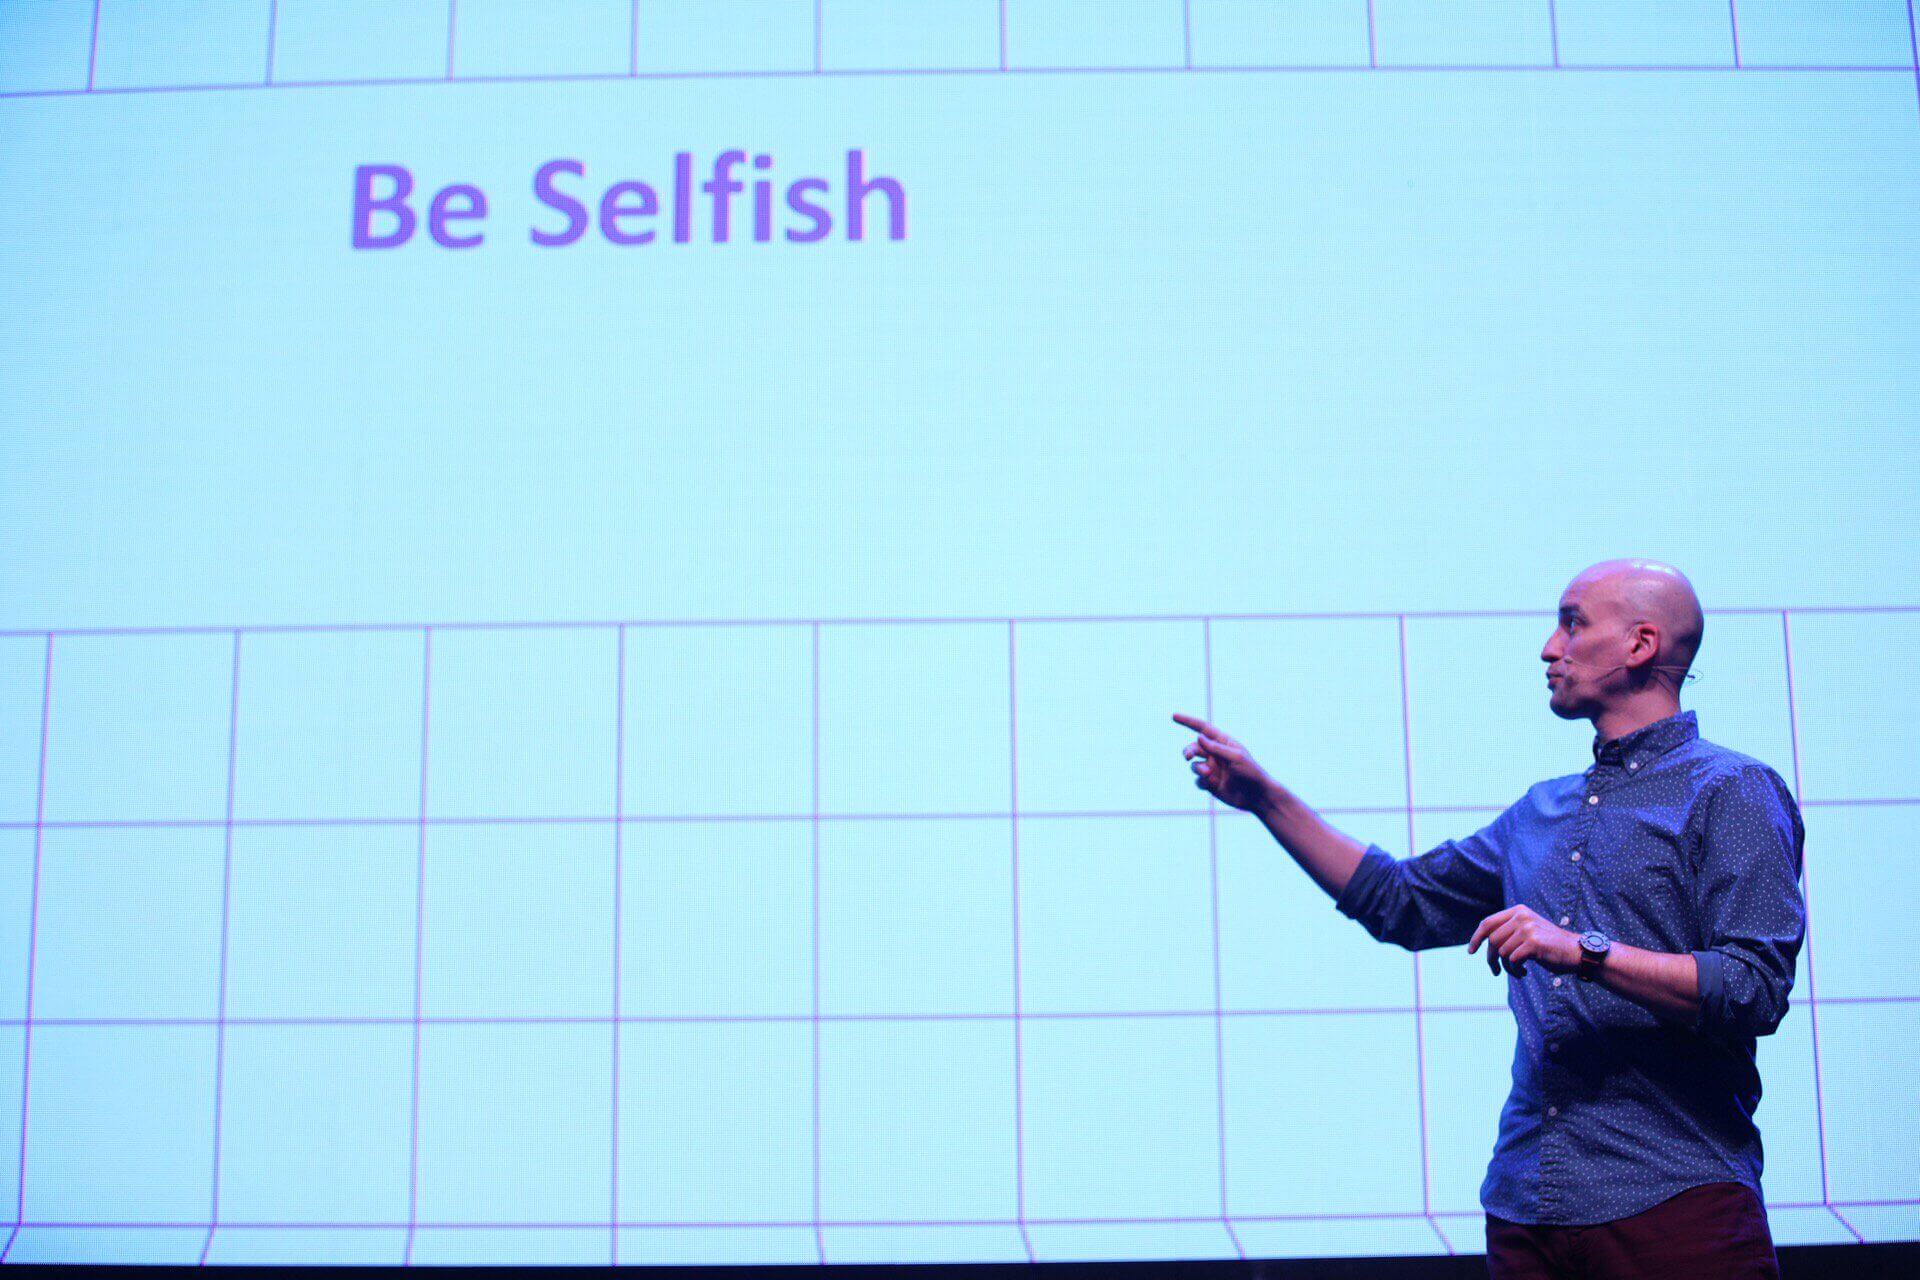 Adrian pointing at the text “Be selfish” on his slide.